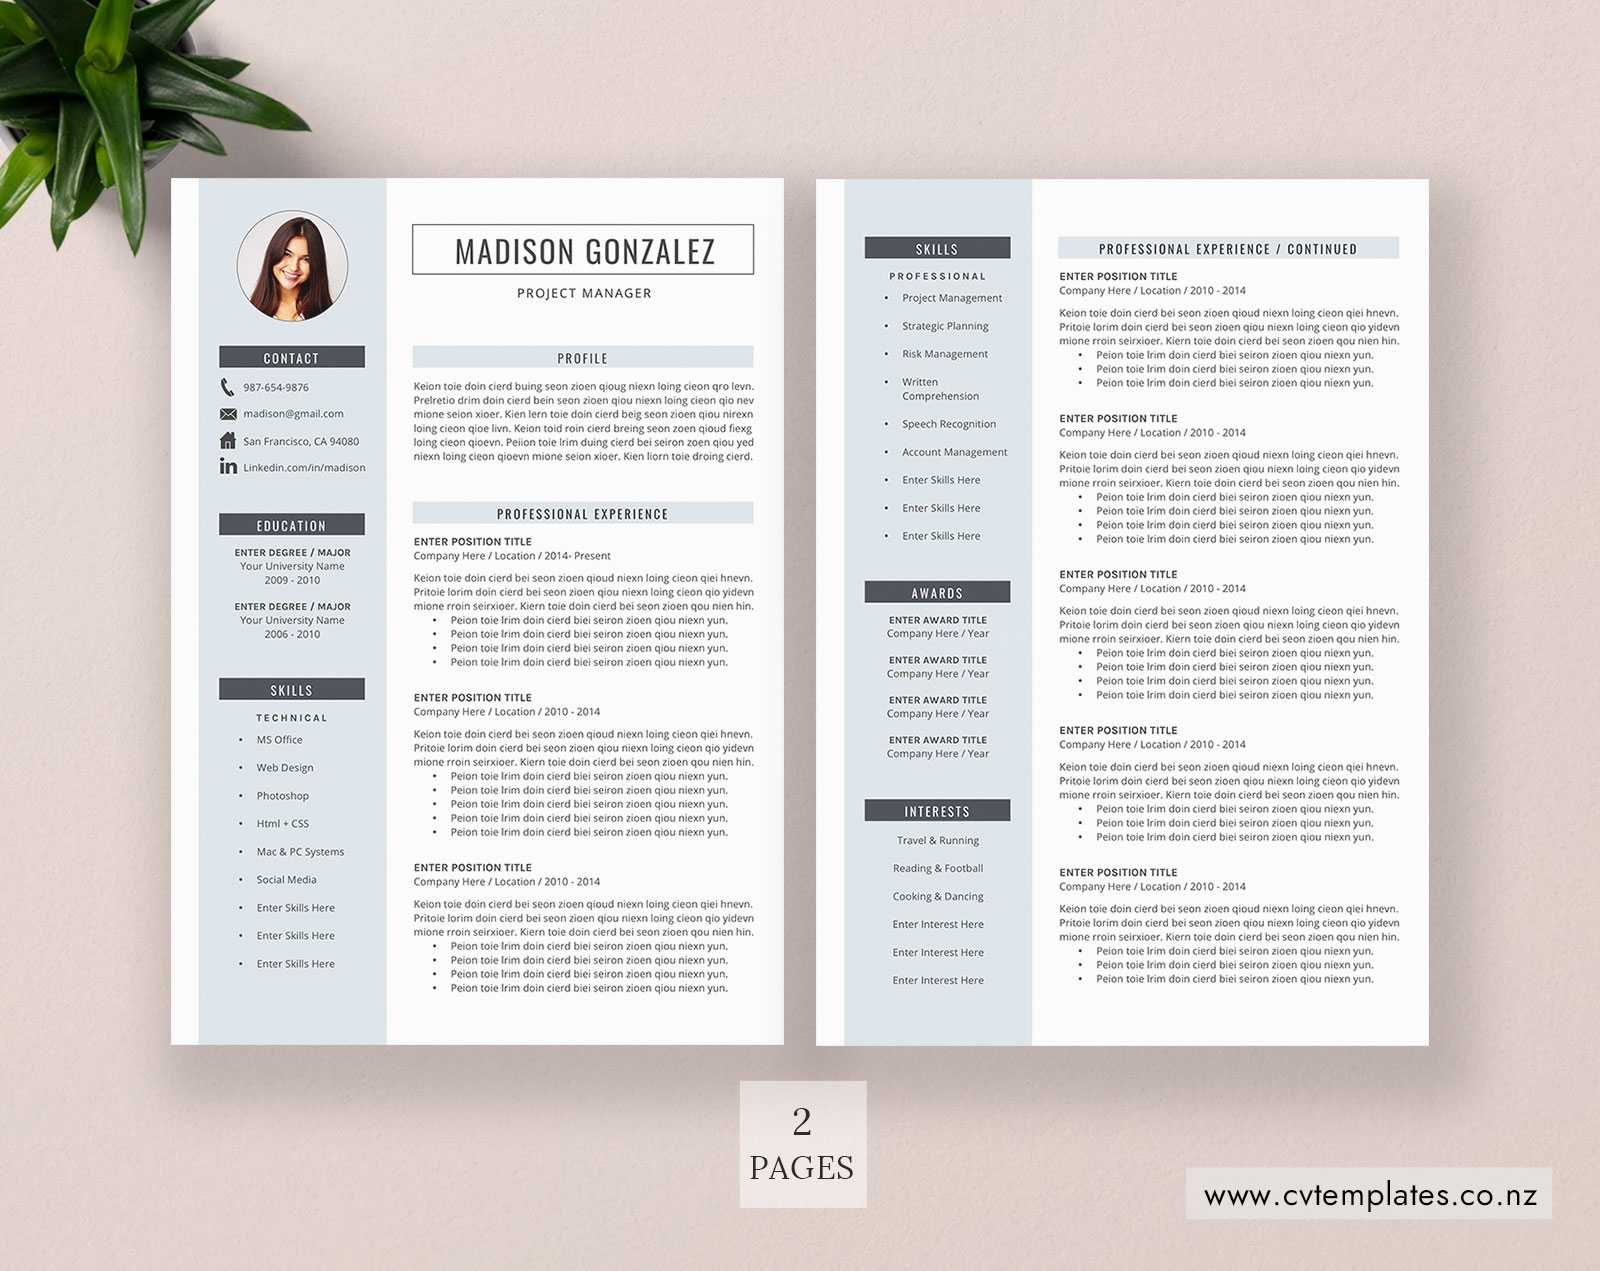 Cv Template, Professional Curriculum Vitae, Minimalist Cv Template Design,  Ms Word, Cover Letter, 1, 2 And 3 Page, Simple Resume Template, Instant With How To Make A Cv Template On Microsoft Word